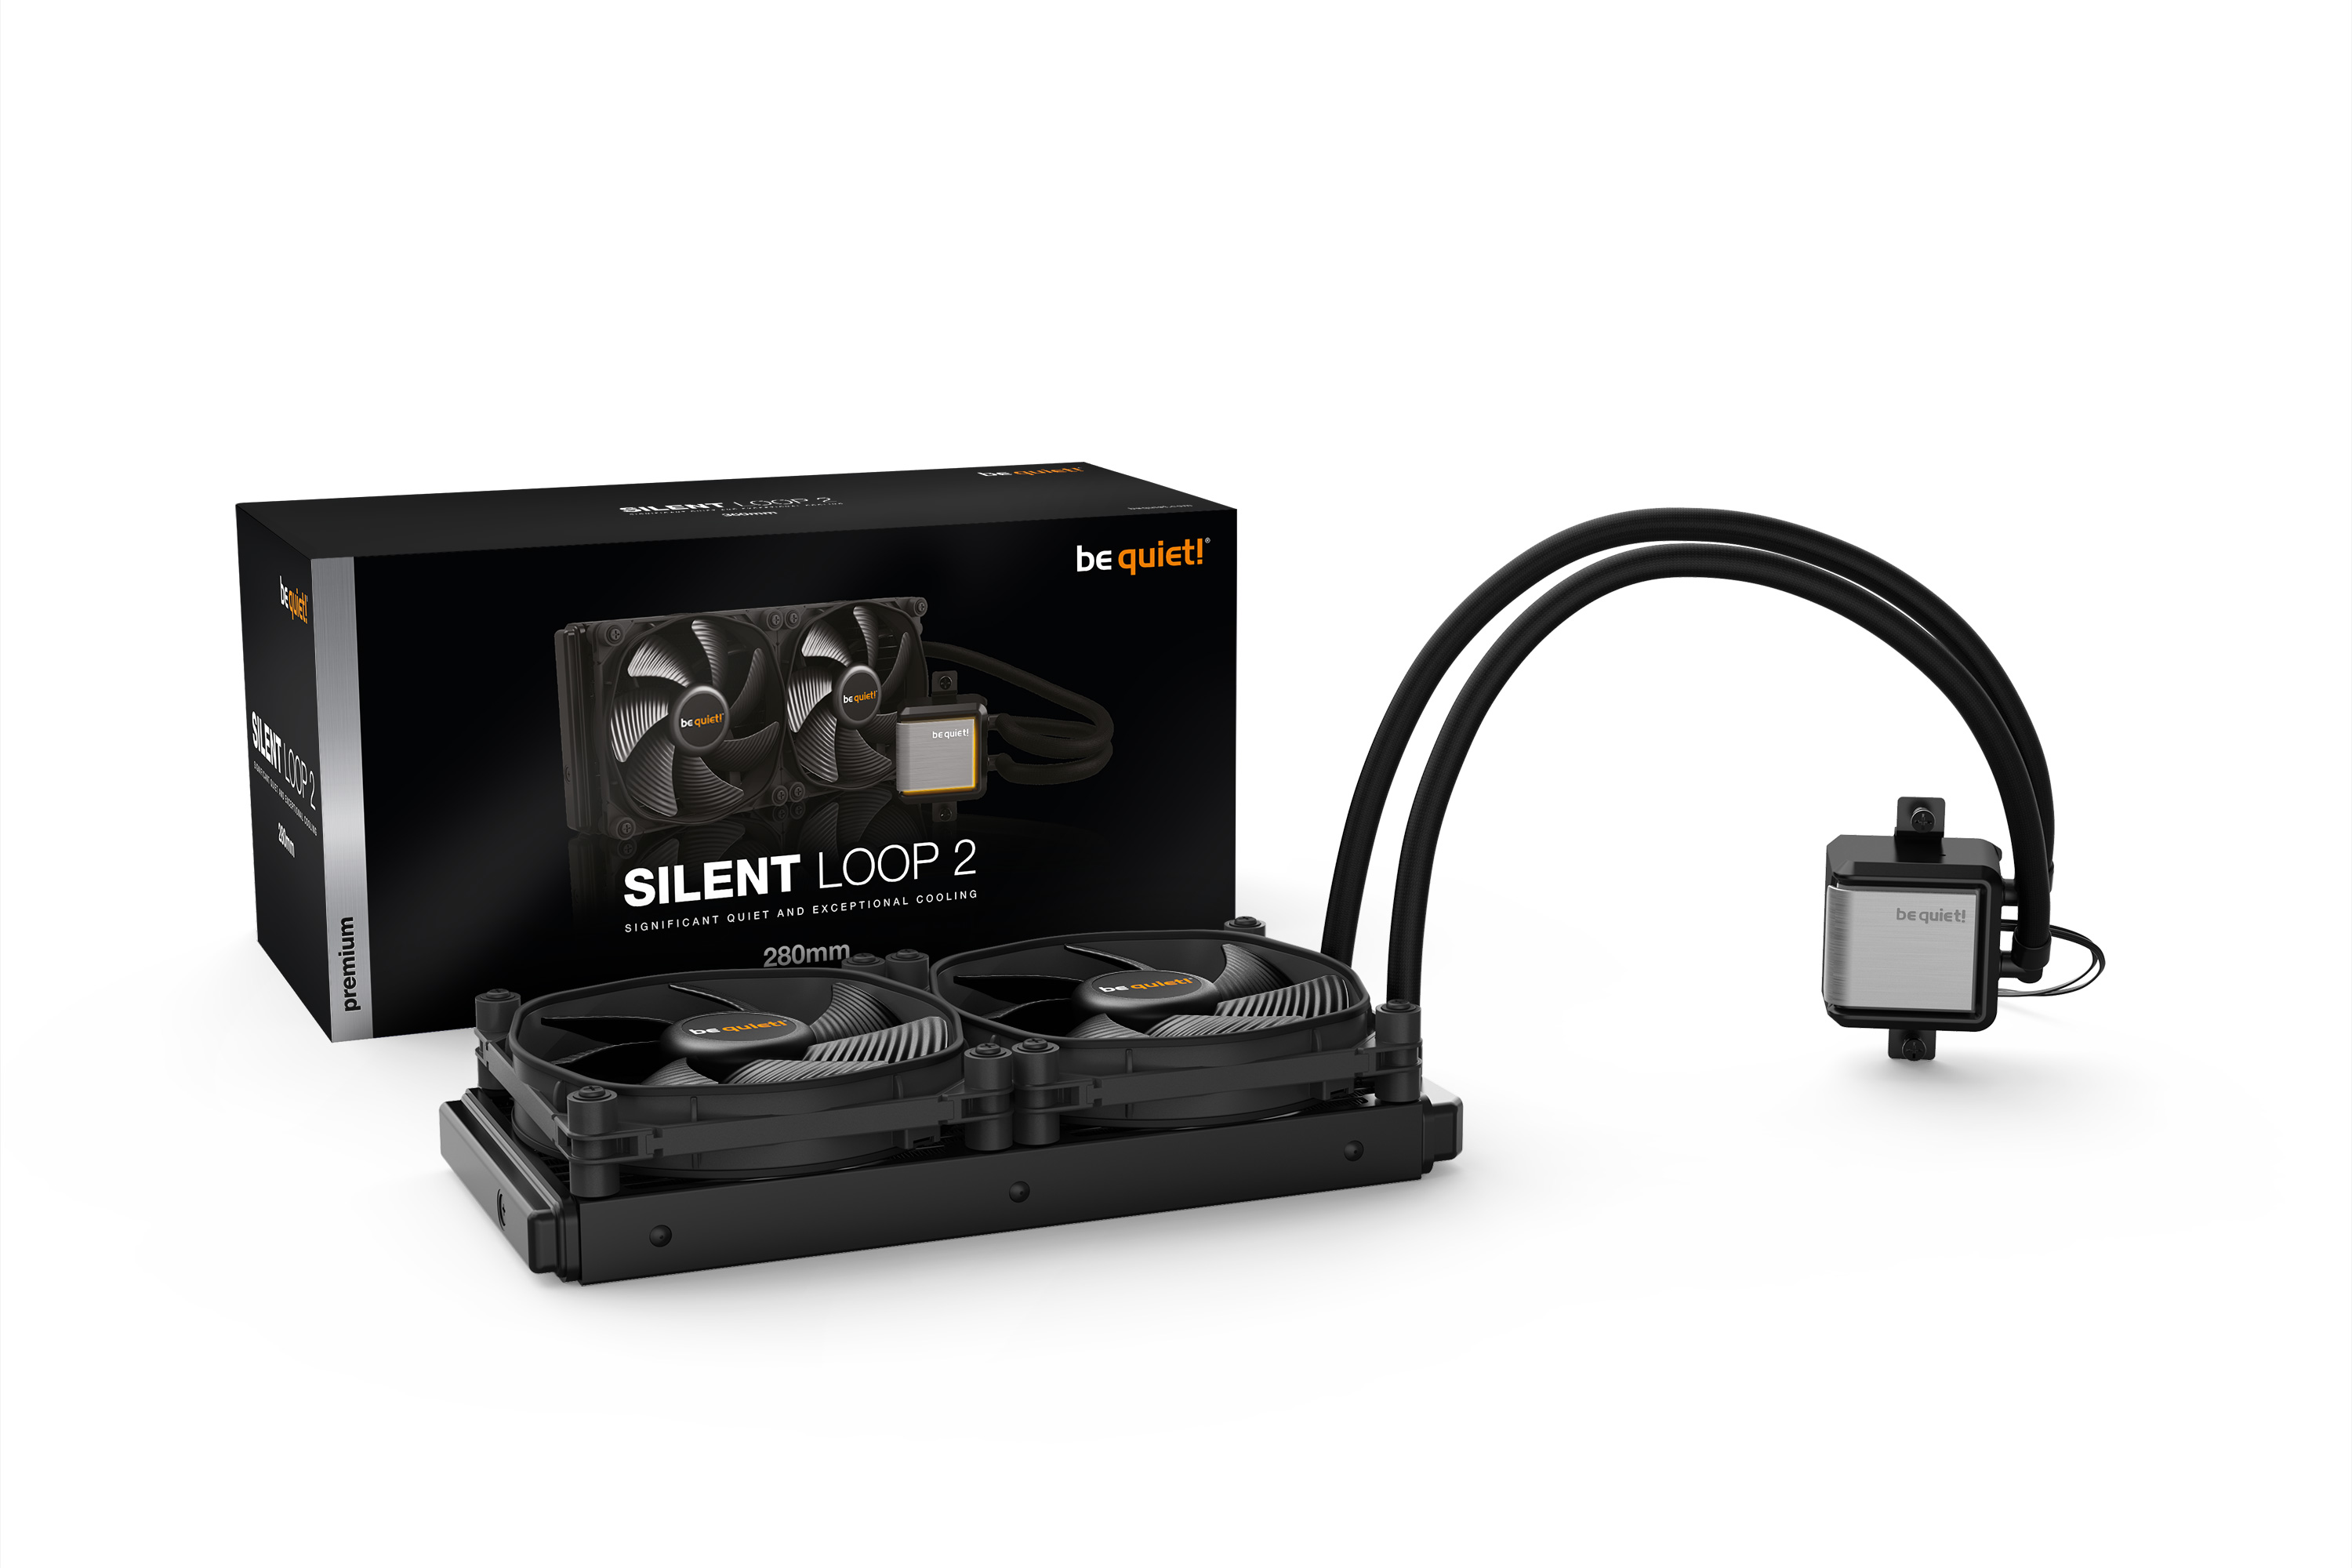 be quiet! water cpu cooling silent loop 2 280mm